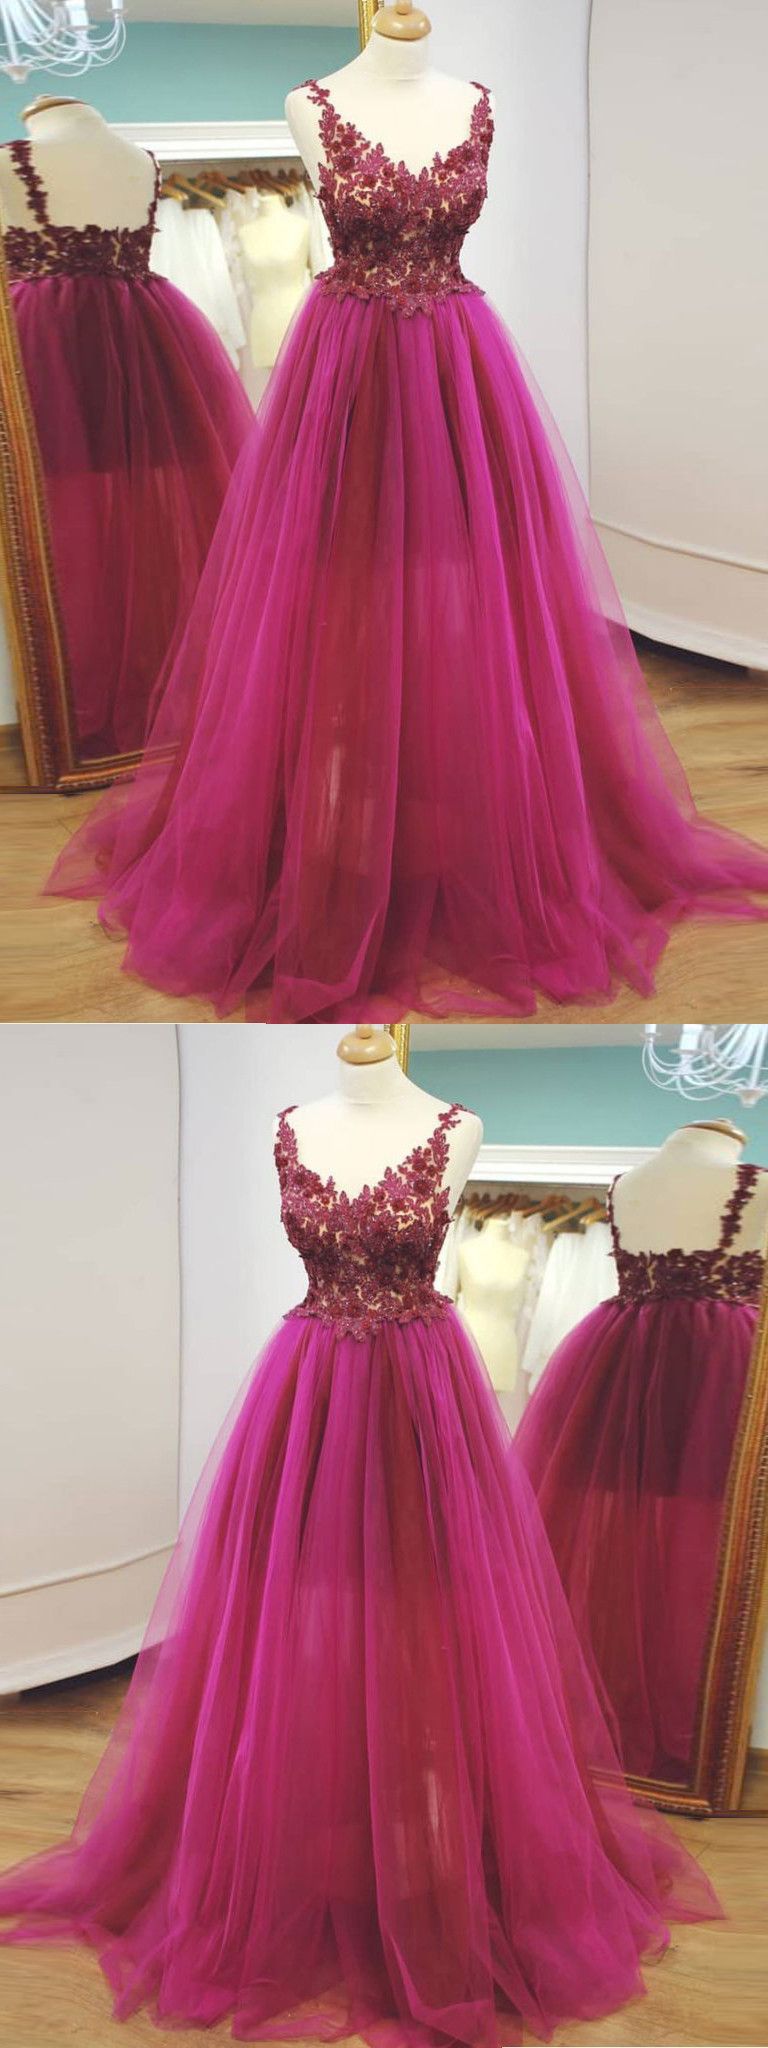 Prom Dress, Sweet 16 Dress, Evening Dress ,Winter Formal Dress, Pageant Dance Dresses, Graduation School Party Gown, PC0072 - Promcoming